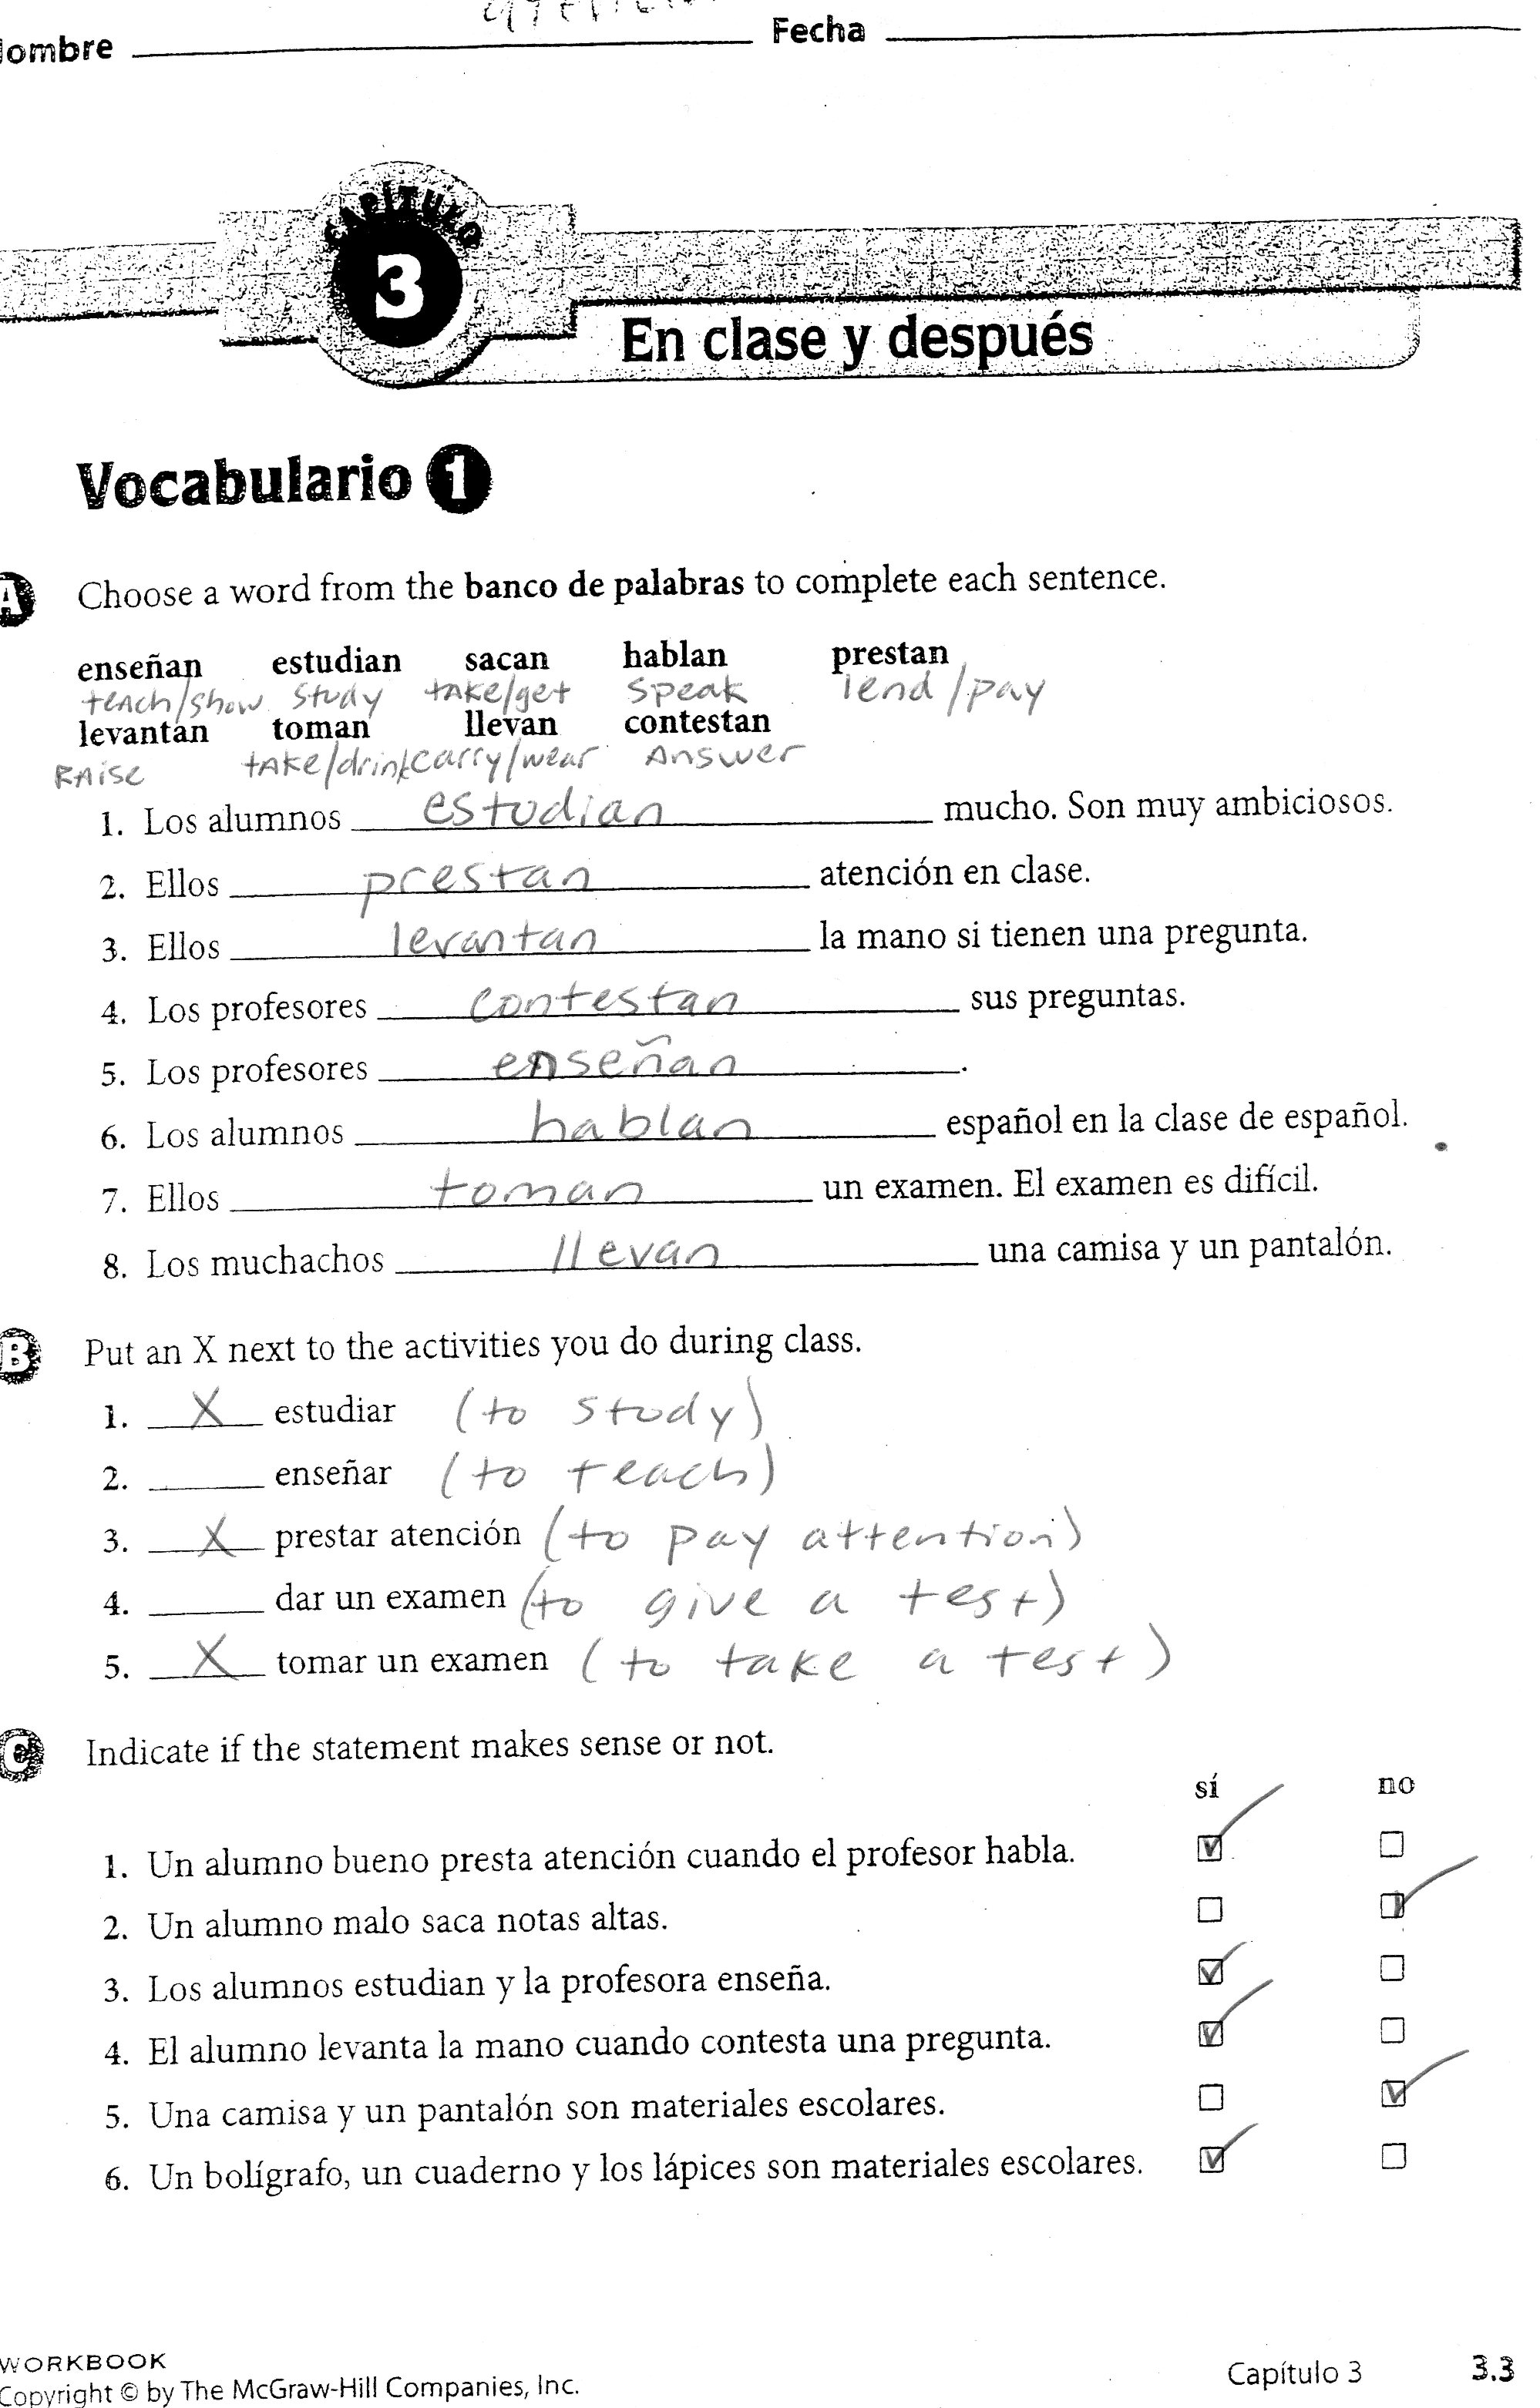 14 Best Images Of Conjugation Worksheet 2 Answers El Verbo Exacto Answers Chemistry Unit 5 